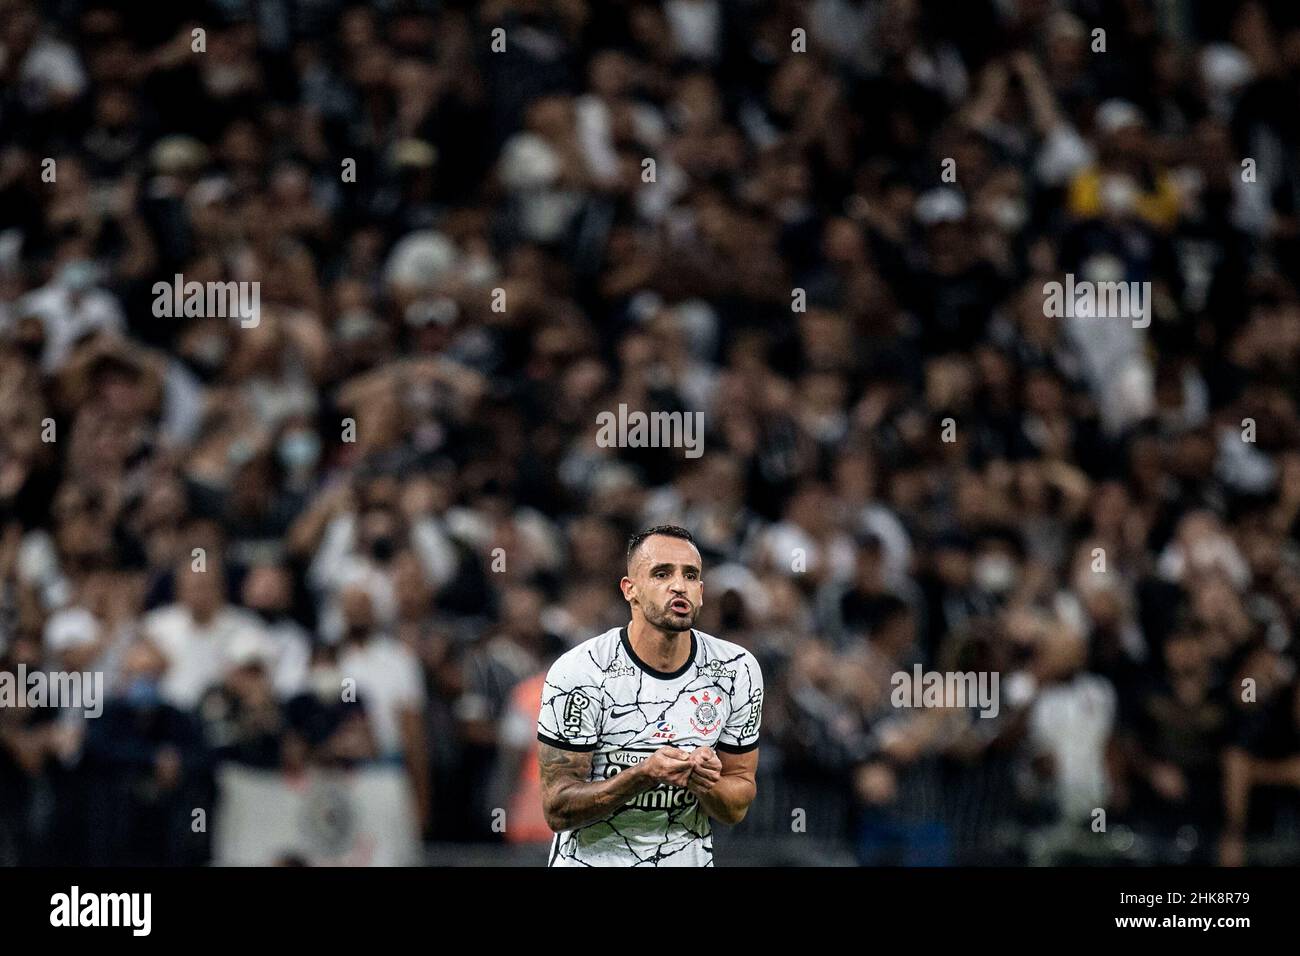 SÃO PAULO, SP - 02.02.2022: CORINTHIANS X SANTOS - Renato Augusto during the game between Corinthians and Santos held at Neo Química Arena in São Paulo, SP. The match is valid for the 3rd round of Paulistão 2022. (Photo: Marco Galvão/Fotoarena) Stock Photo